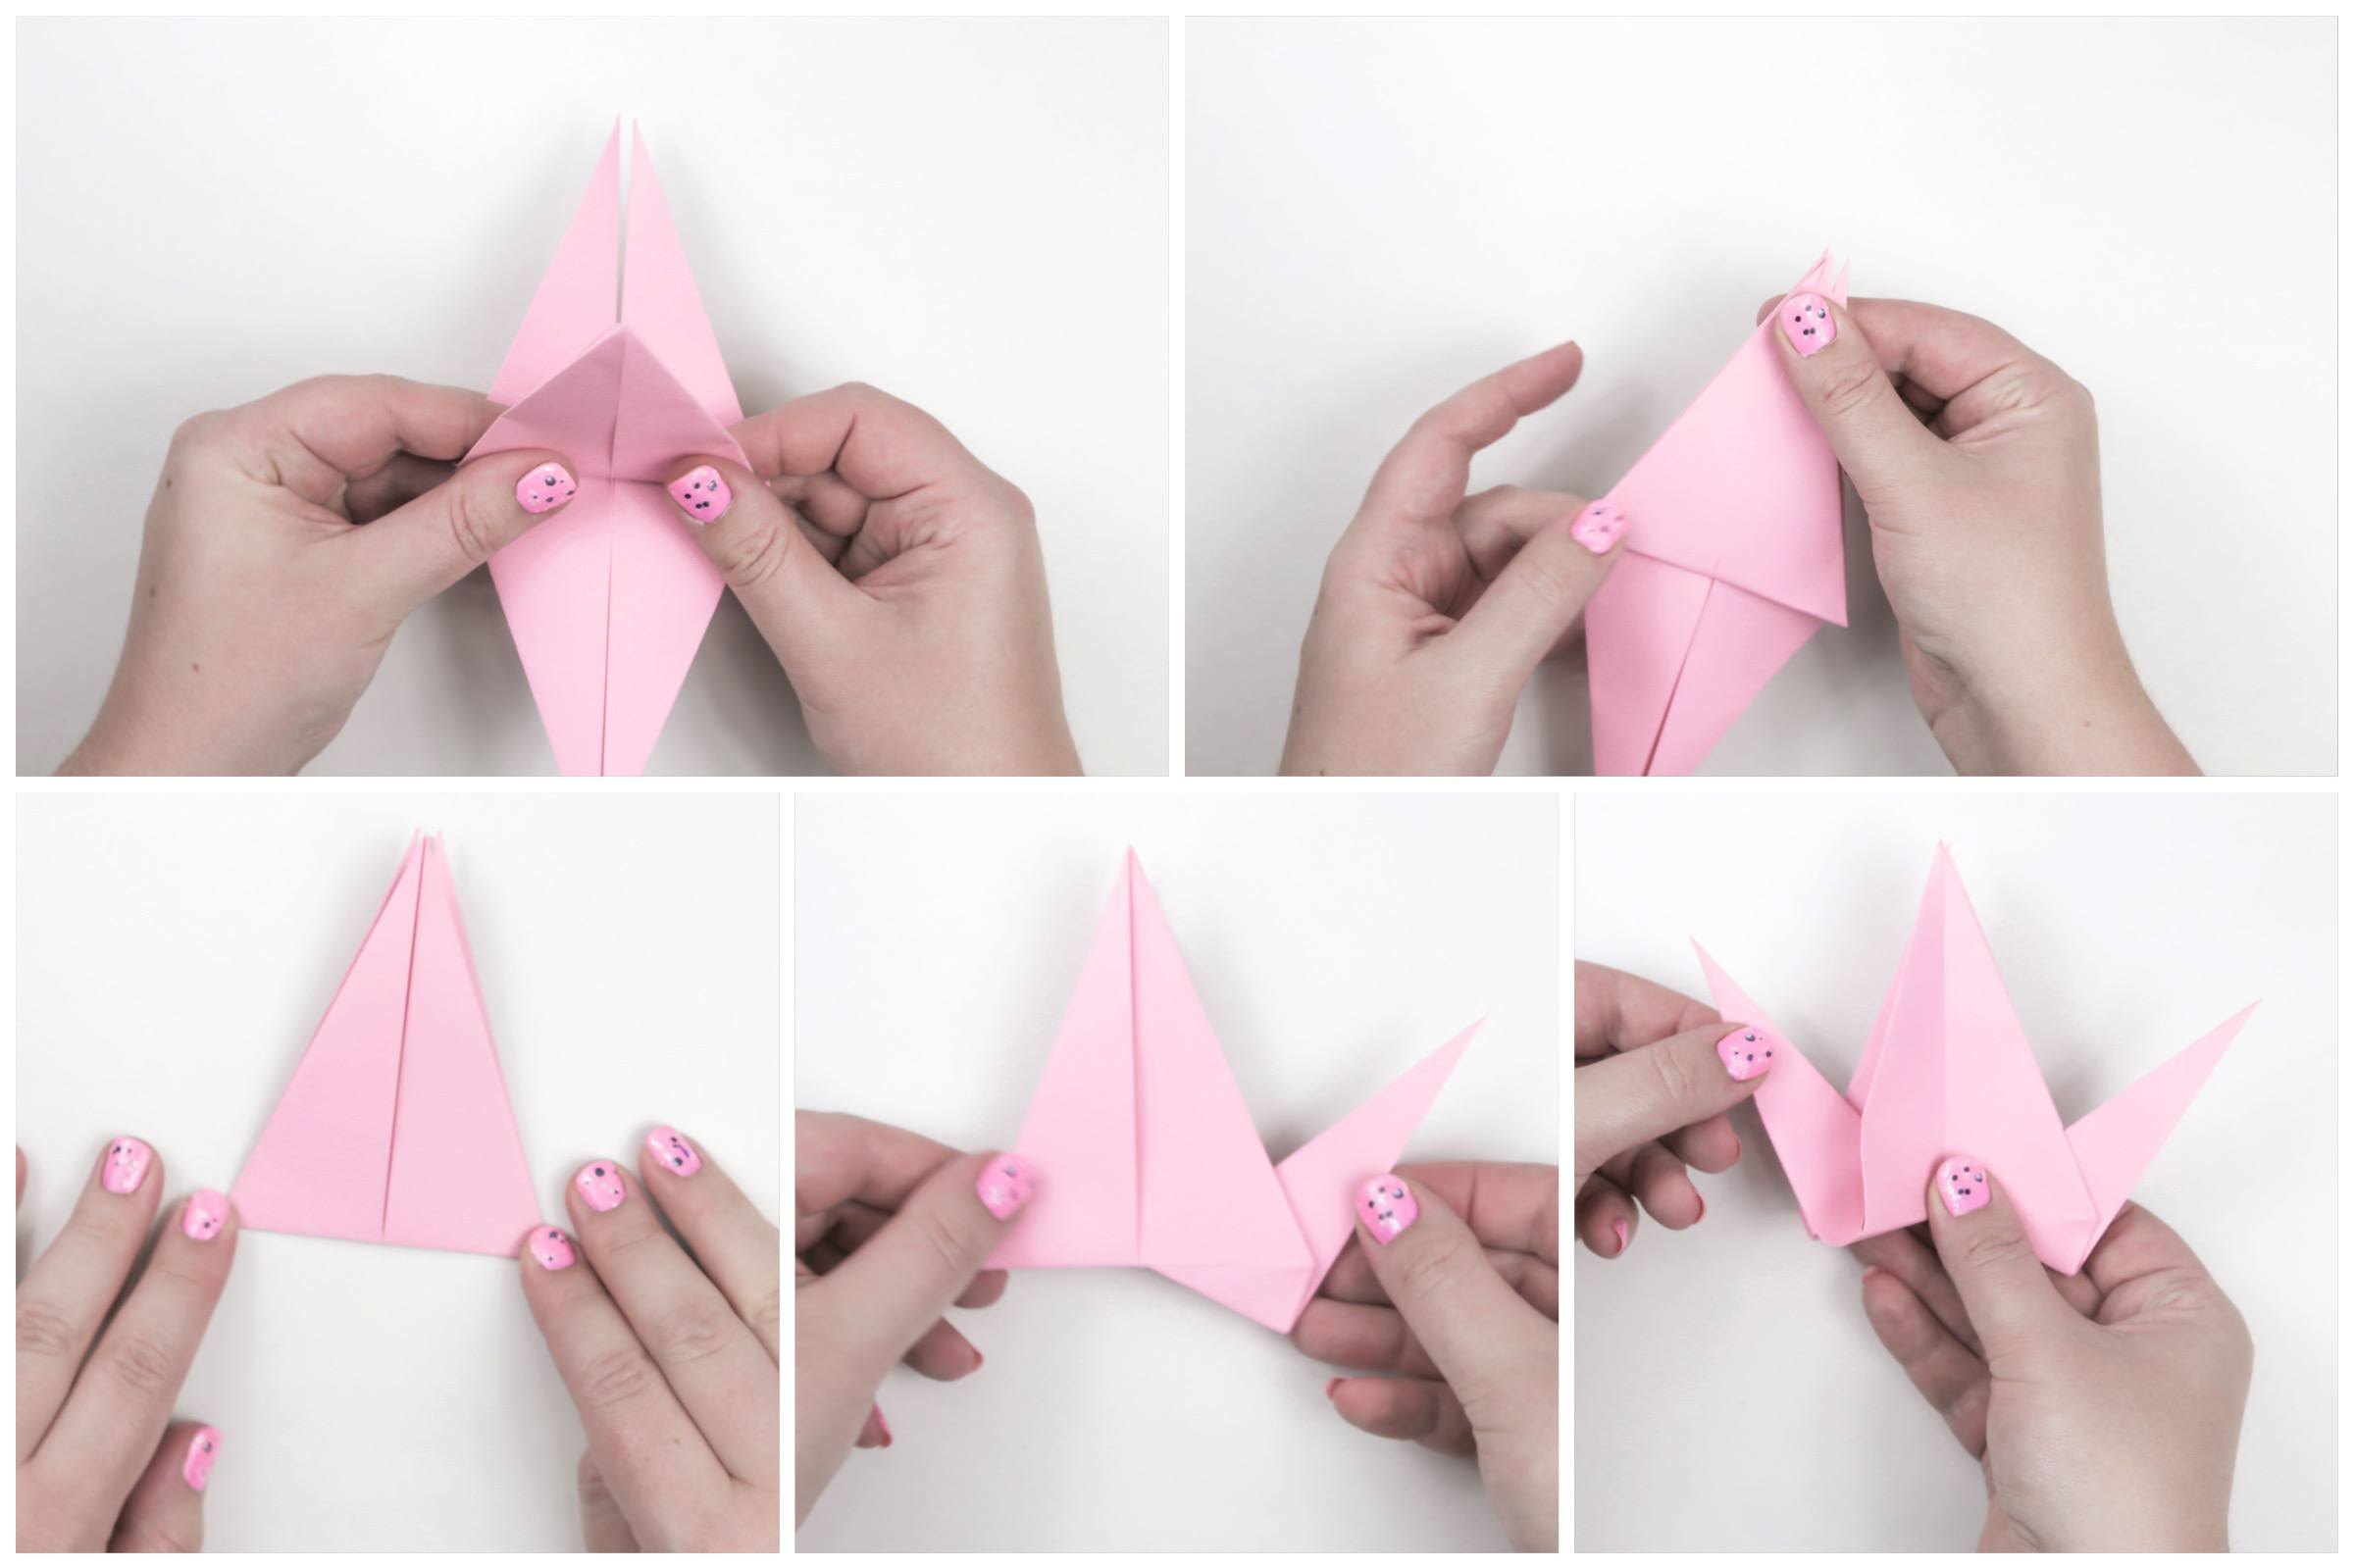 How To Make An Origami Flapping Bird Step By Step Origami Flapping Bird Tutorial